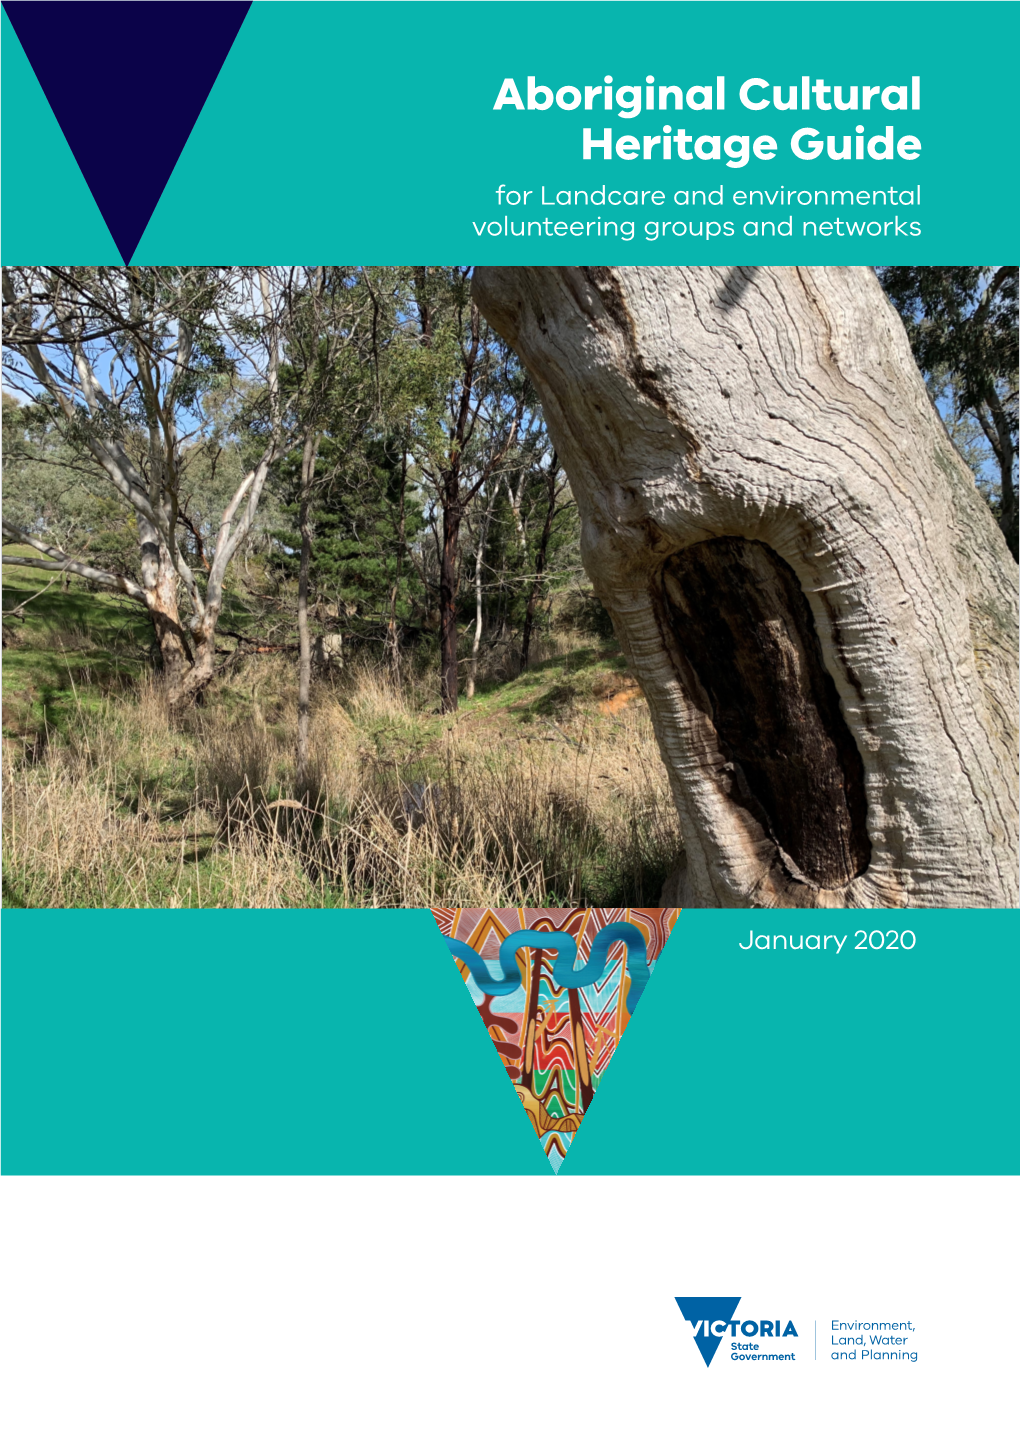 Aboriginal Cultural Heritage Guide for Landcare and Environmental Volunteering Groups and Networks